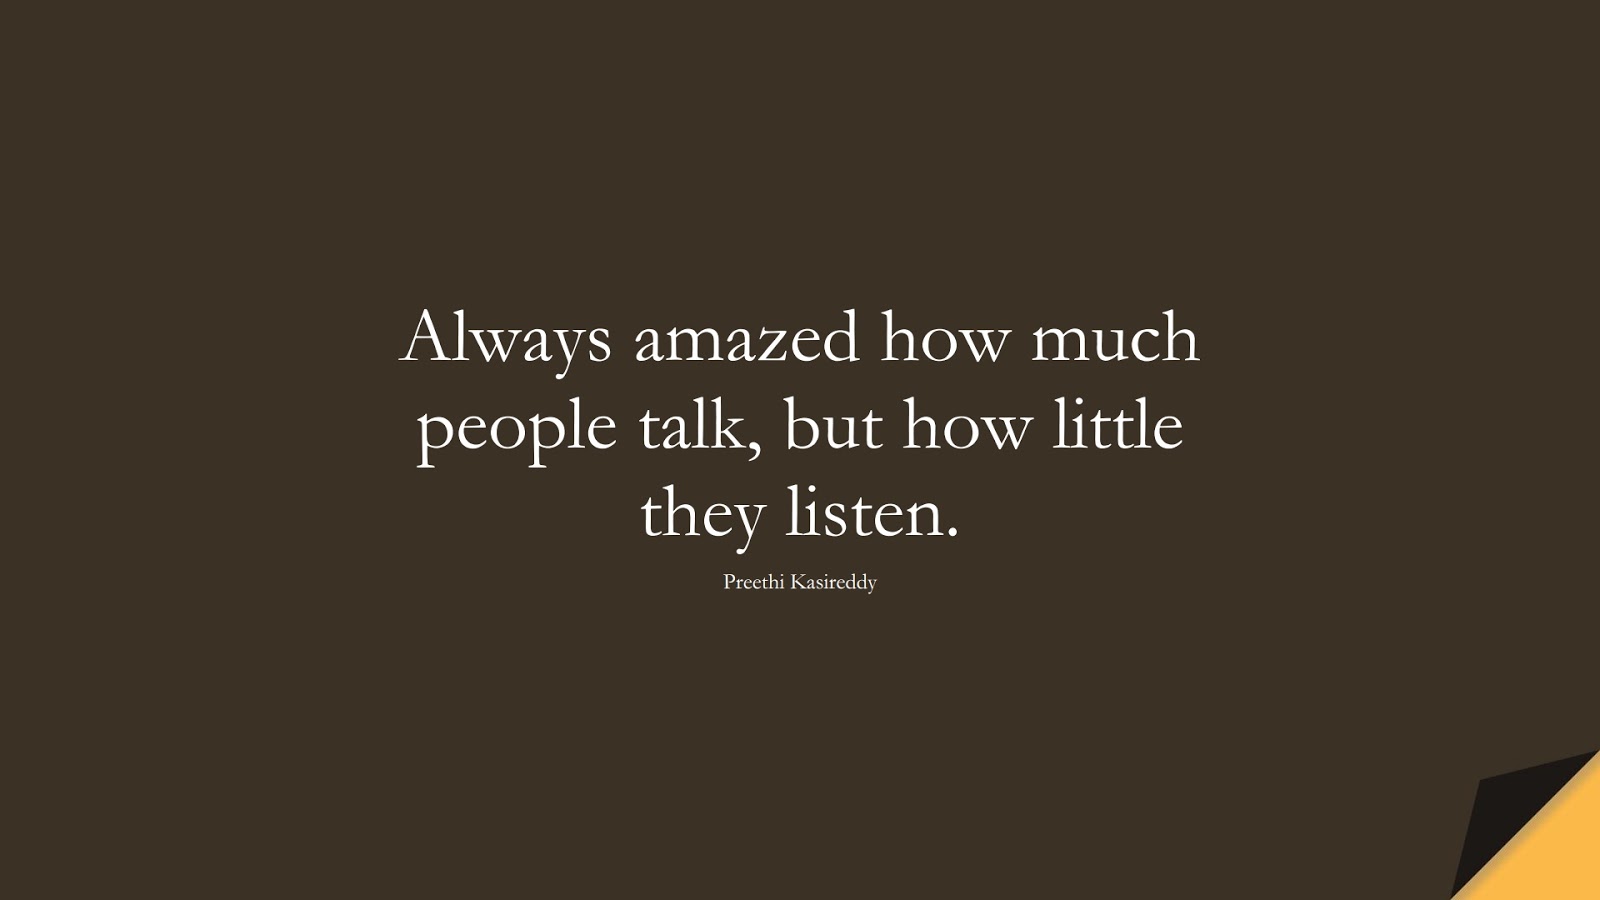 Always amazed how much people talk, but how little they listen. (Preethi Kasireddy);  #RelationshipQuotes